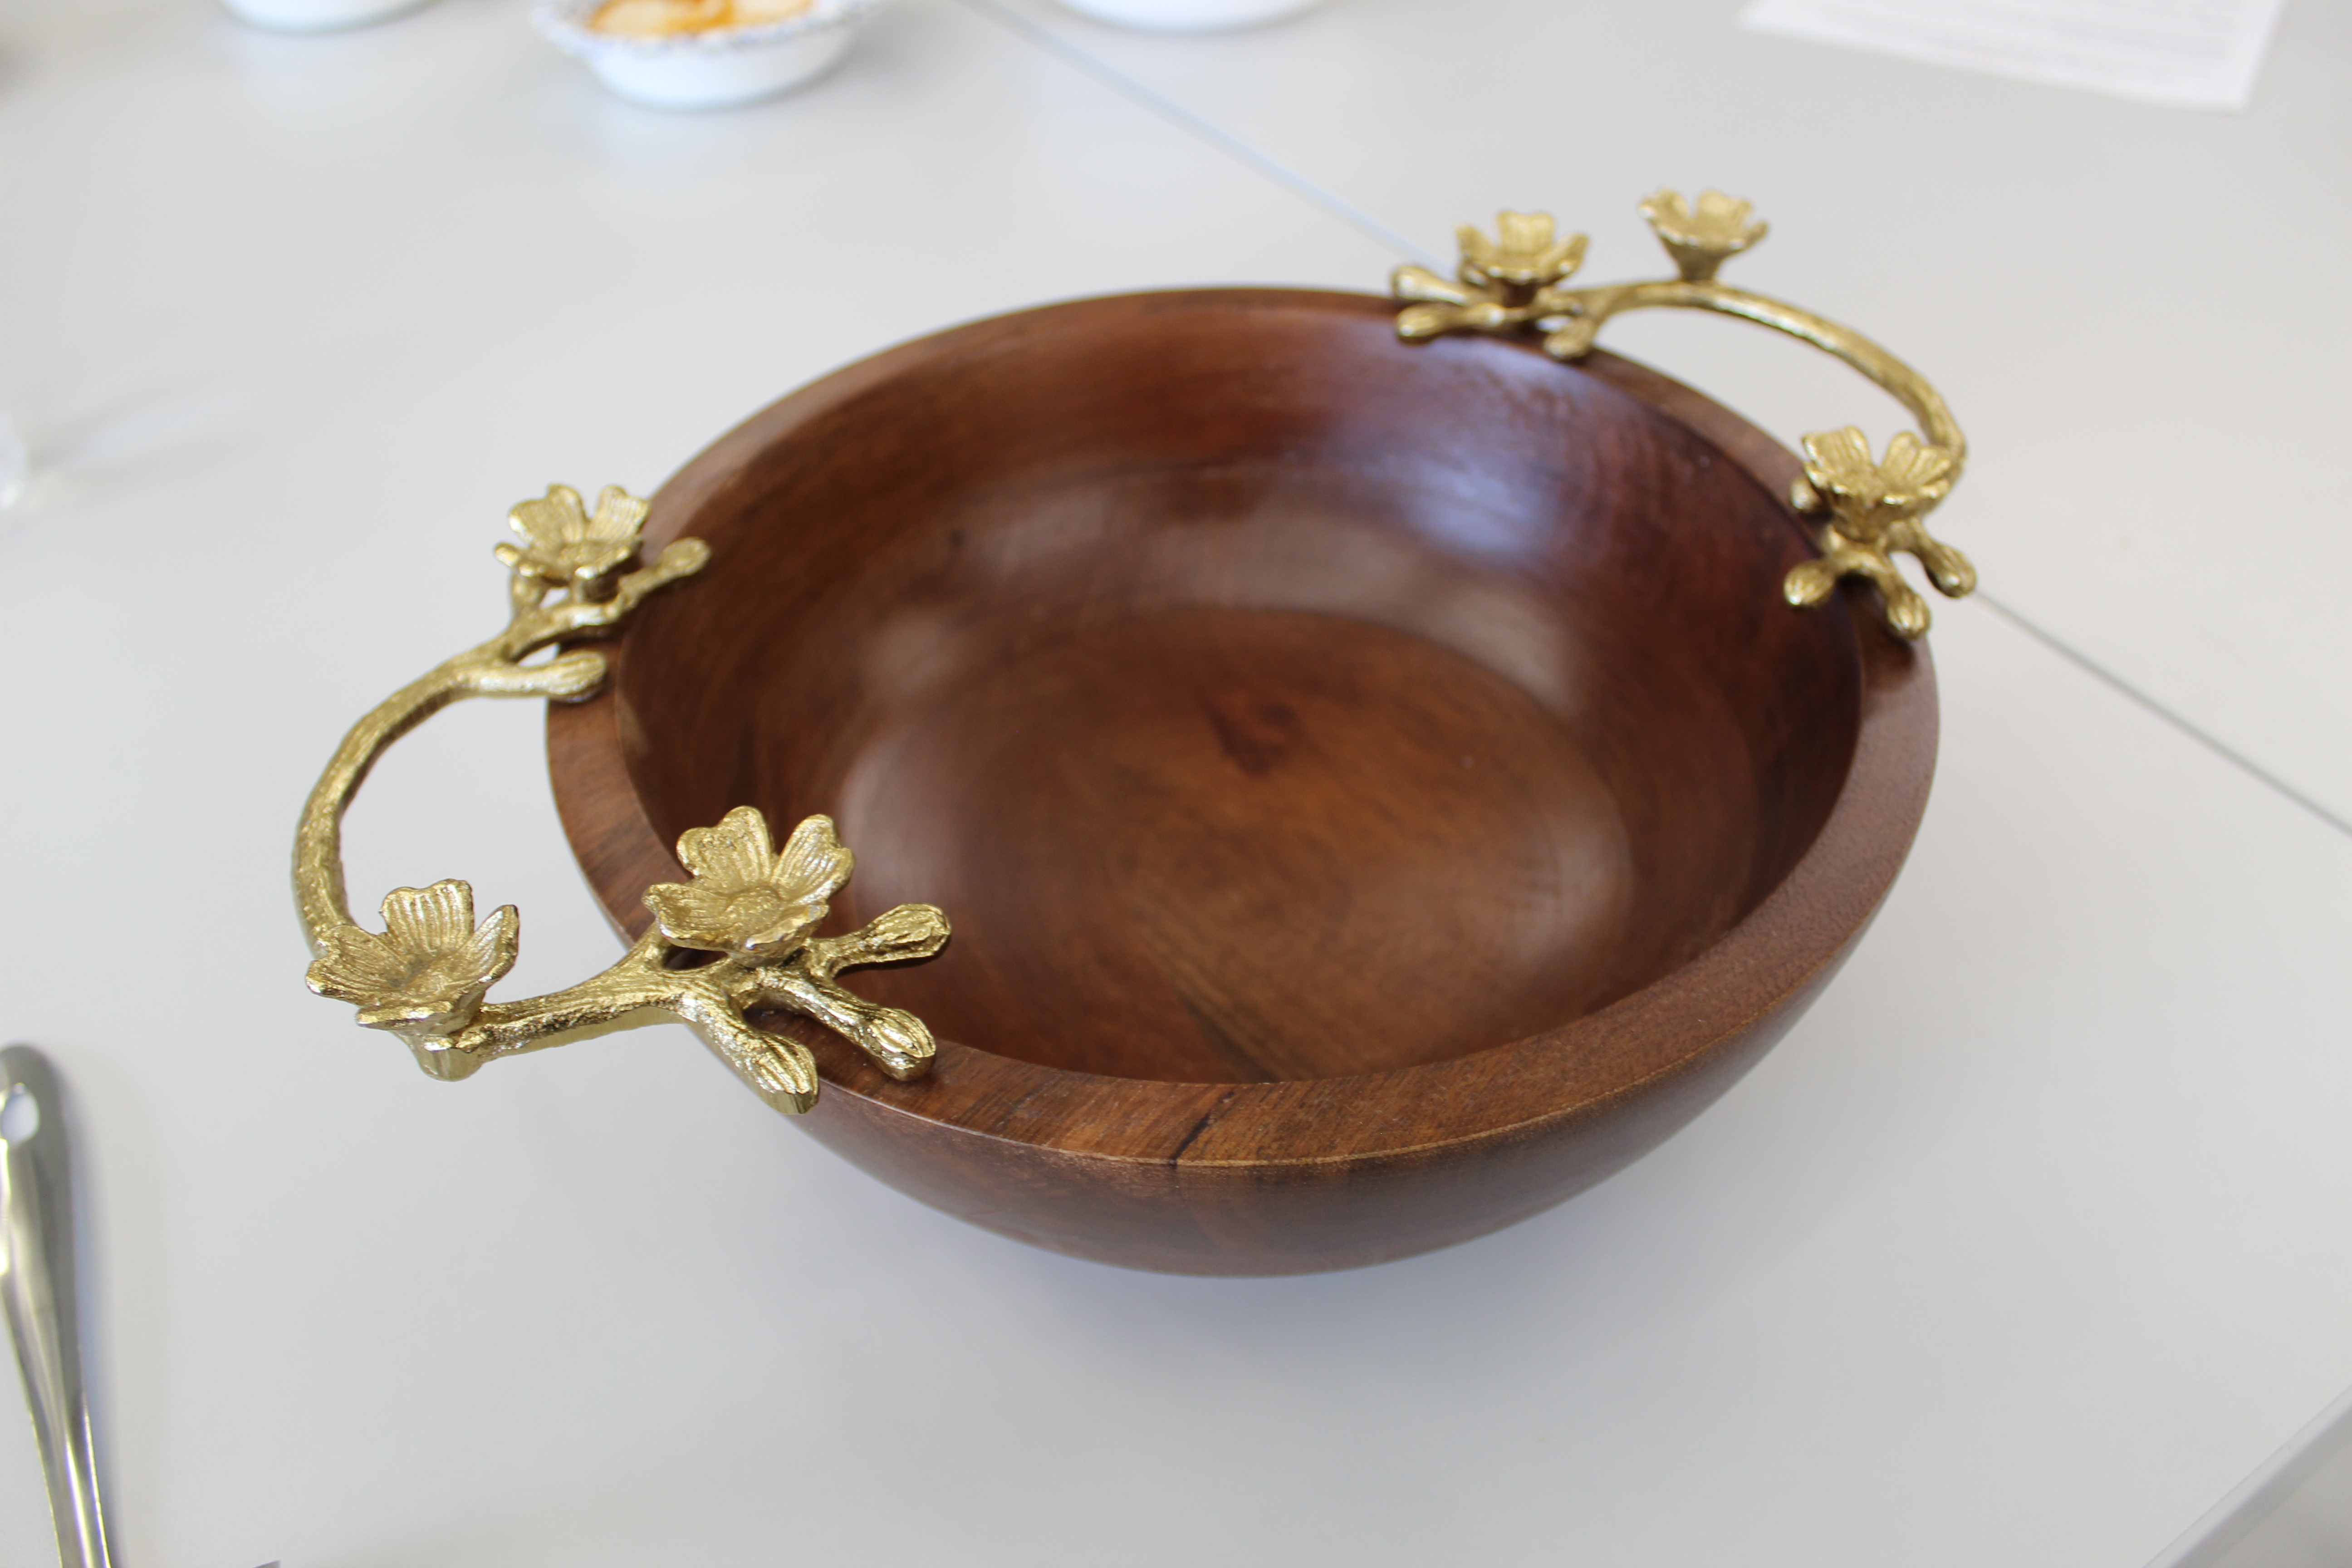 A wooden bowl with gaudy golden handles